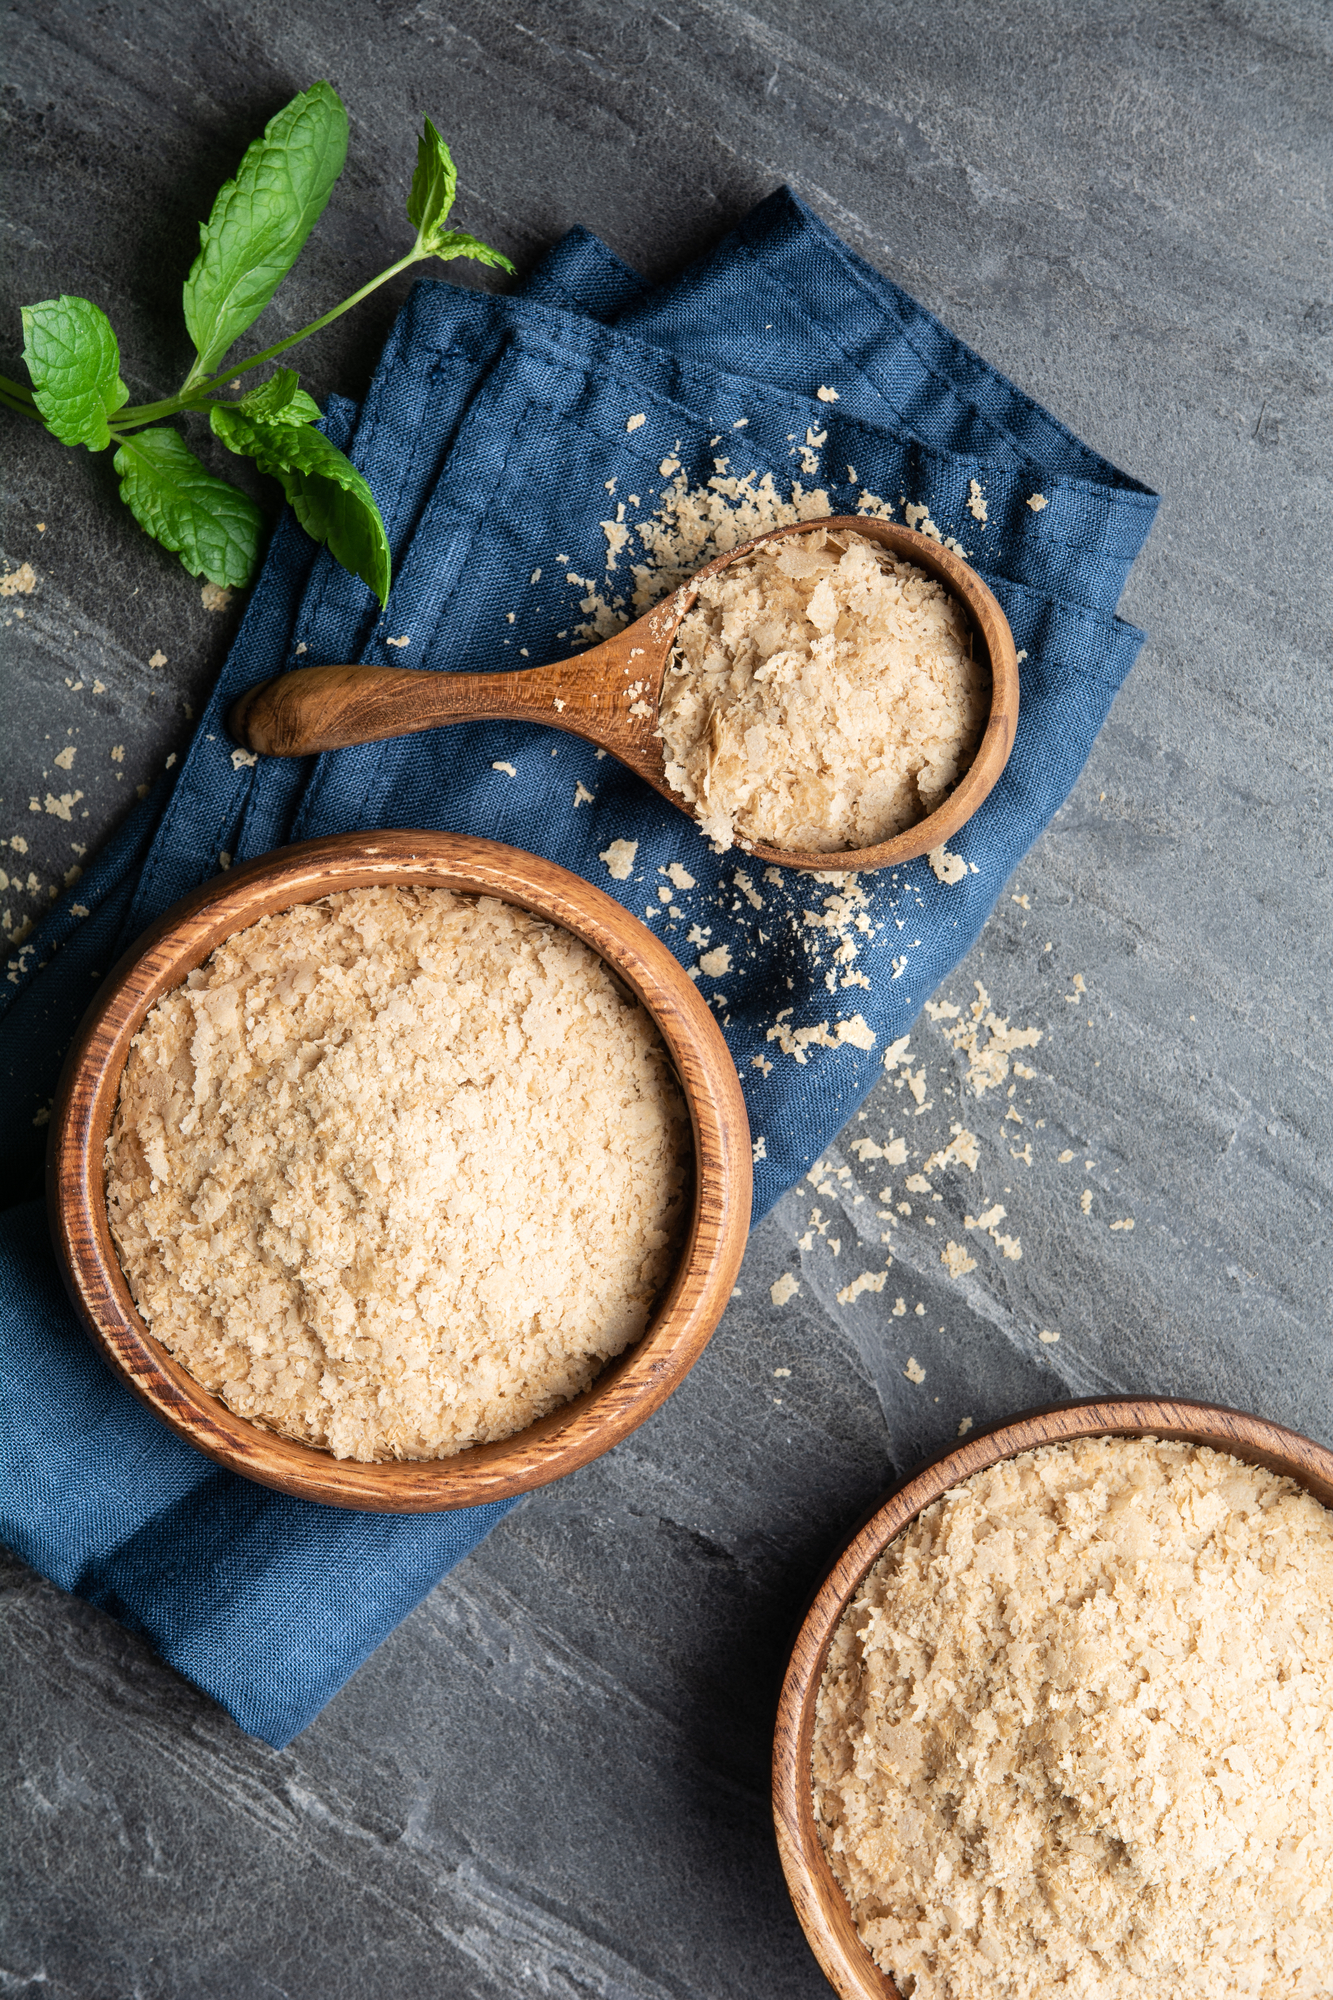 Nutritional Yeast Substitutes